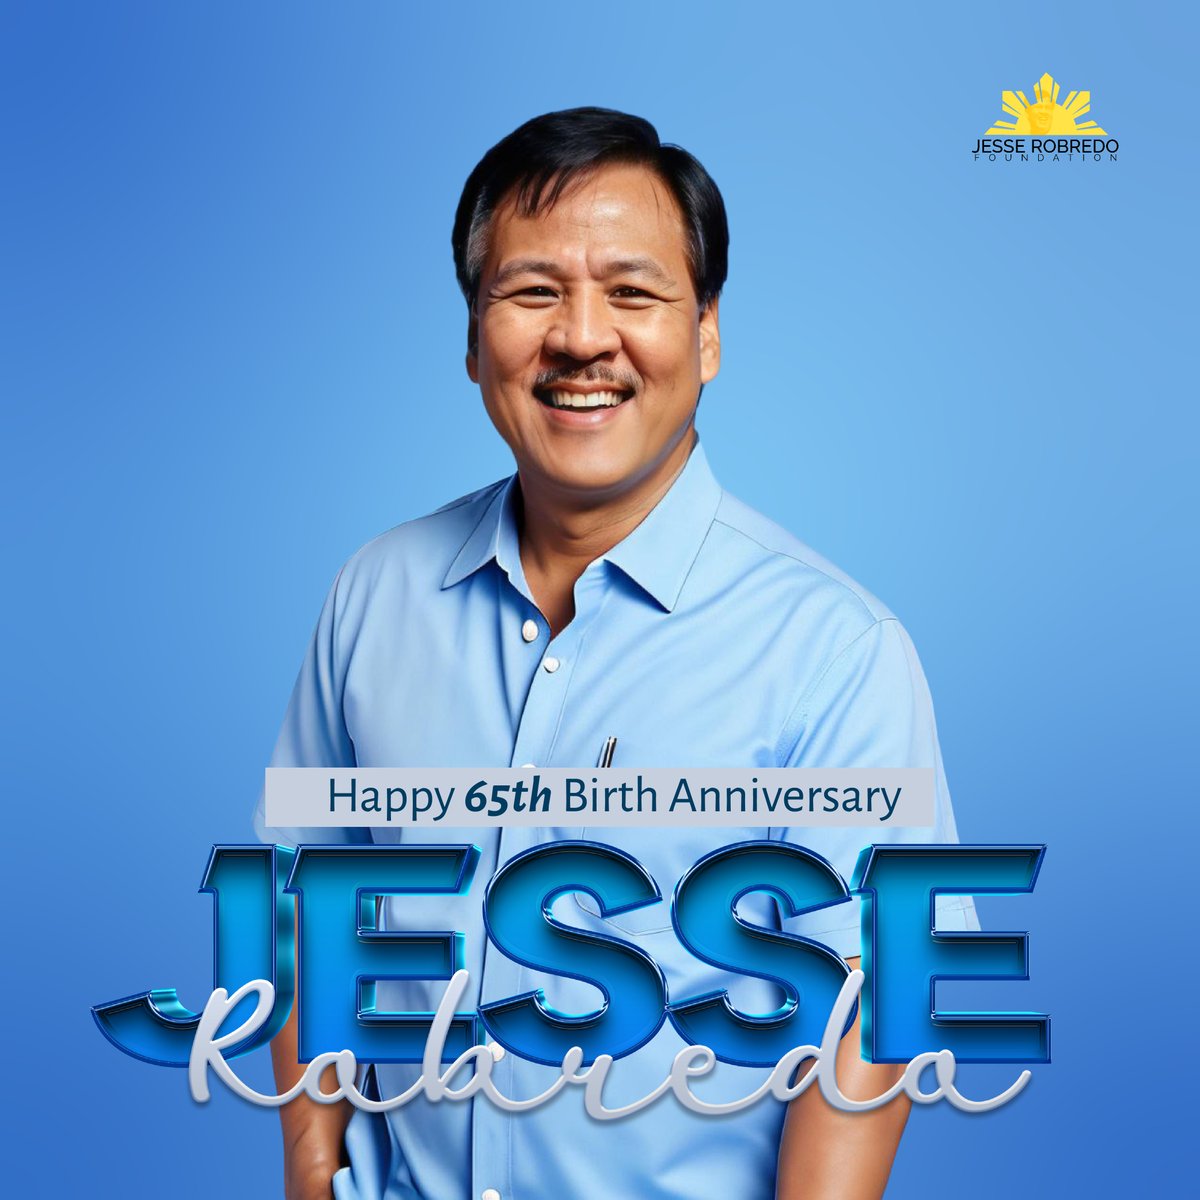 Today marks the 65th birth anniversary of Jesse M. Robredo, a symbol of good governance. As we promote upright, competent, and compassionate leadership, let us honor the trailblazer he was. Join us in prayer as we commemorate his life and legacy.

#MatinoMahusayAtMayPuso